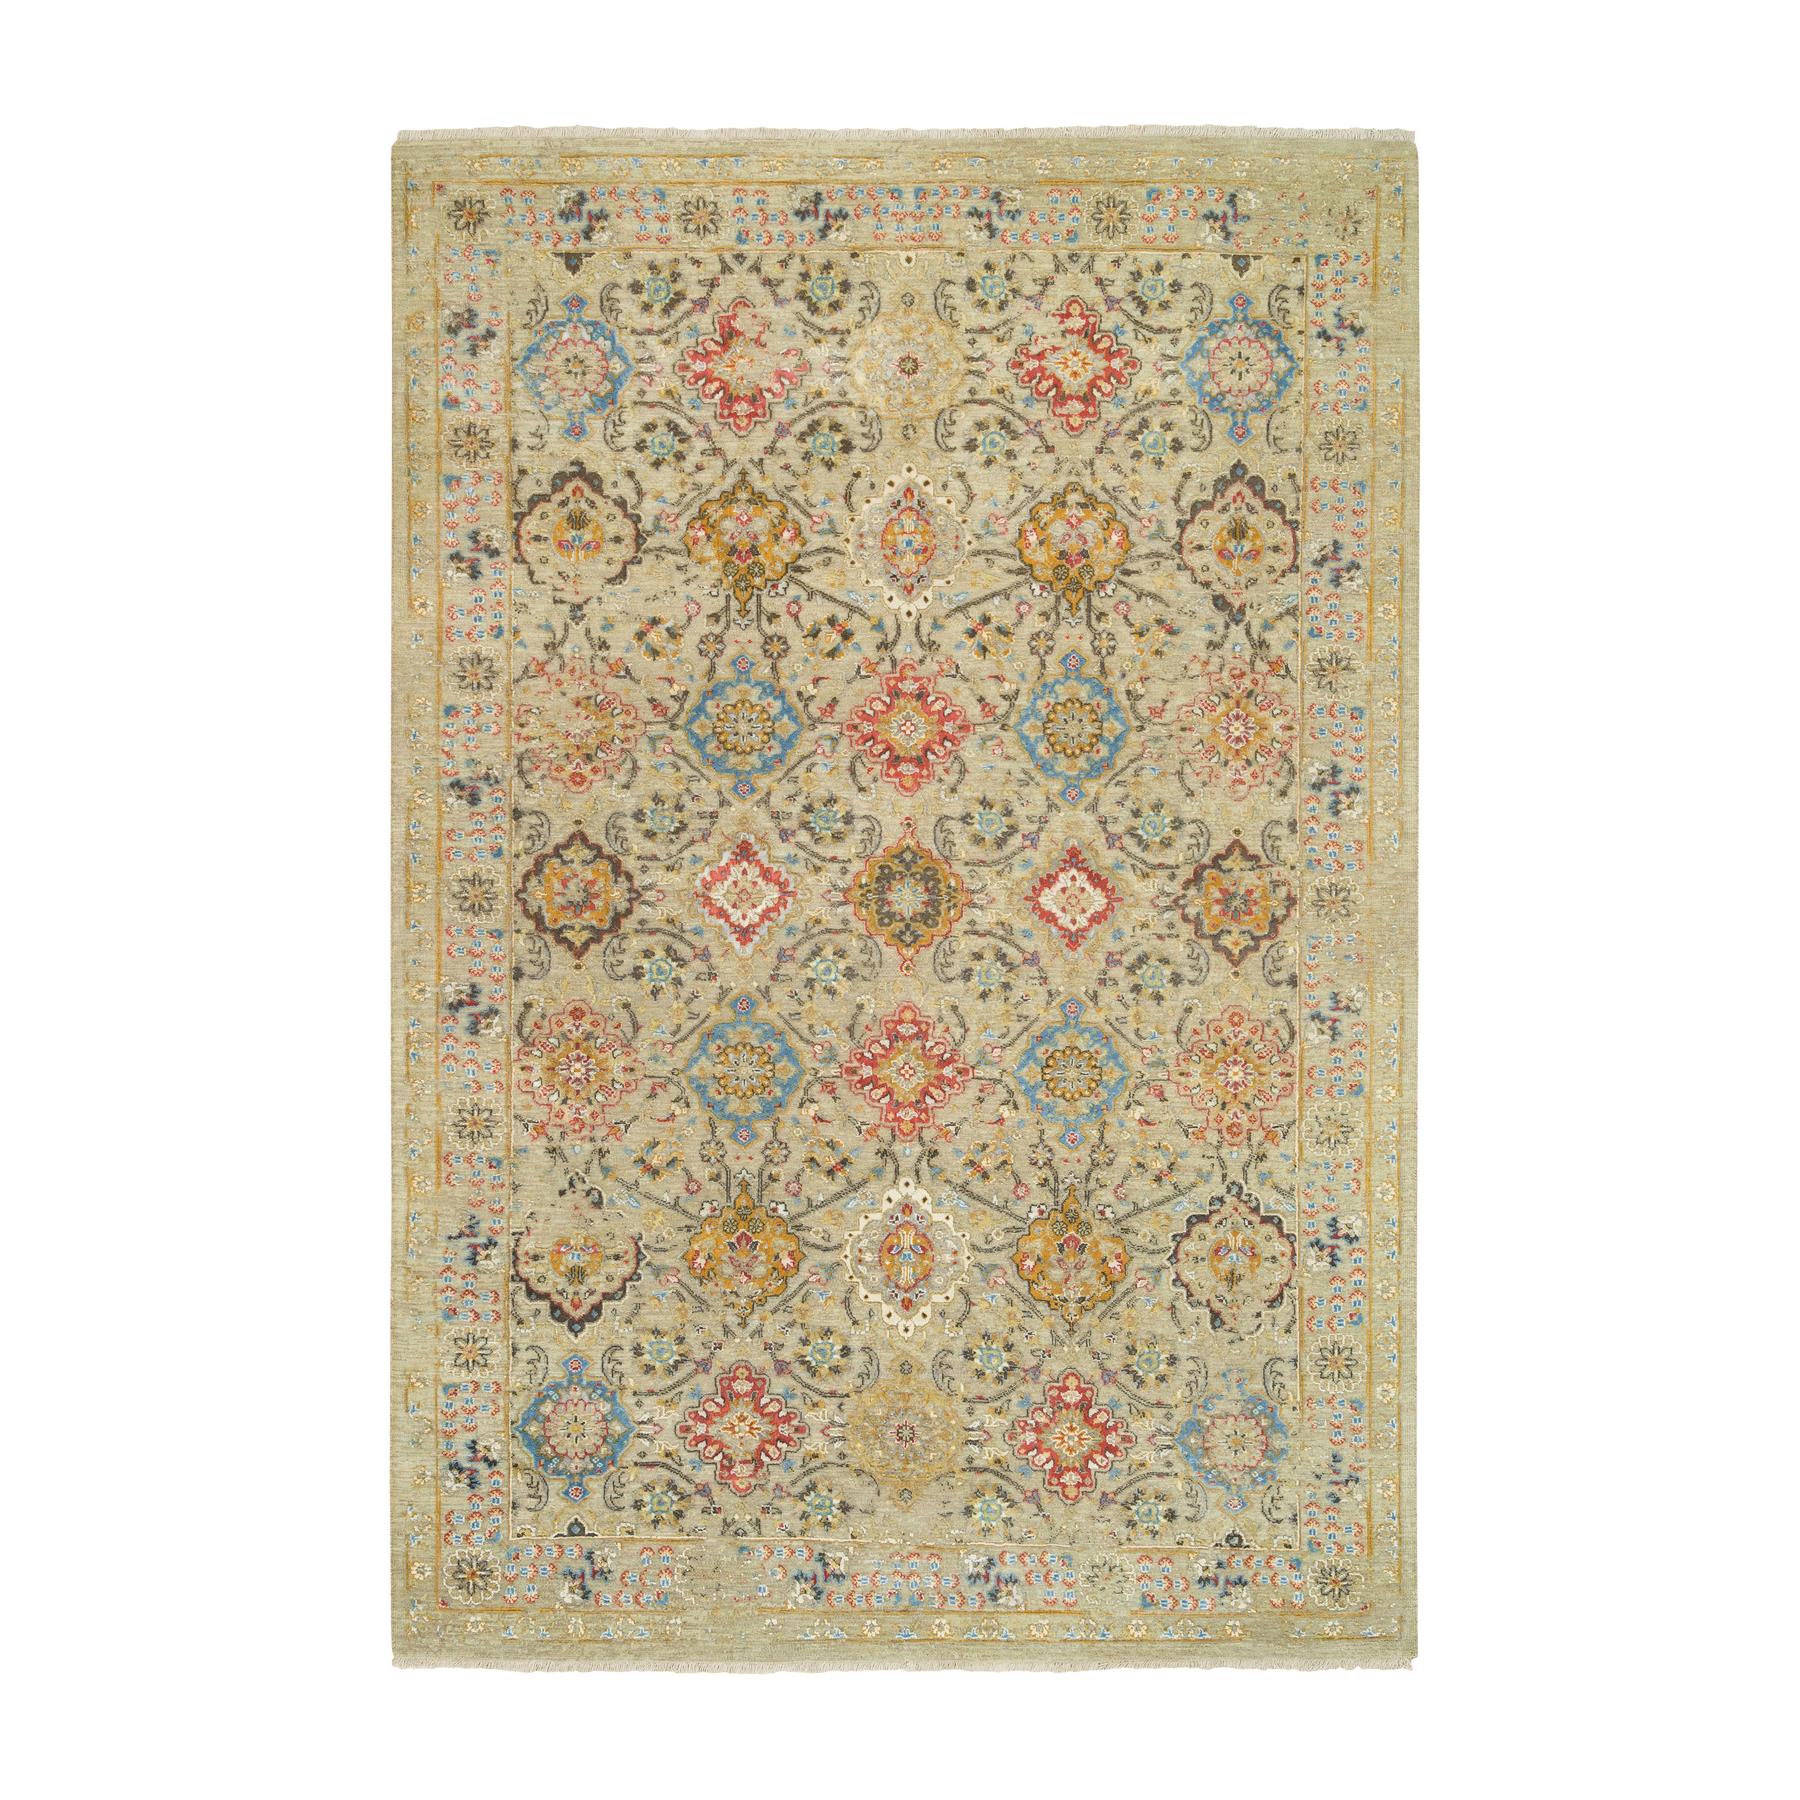  Silk Hand-Knotted Area Rug 6'2